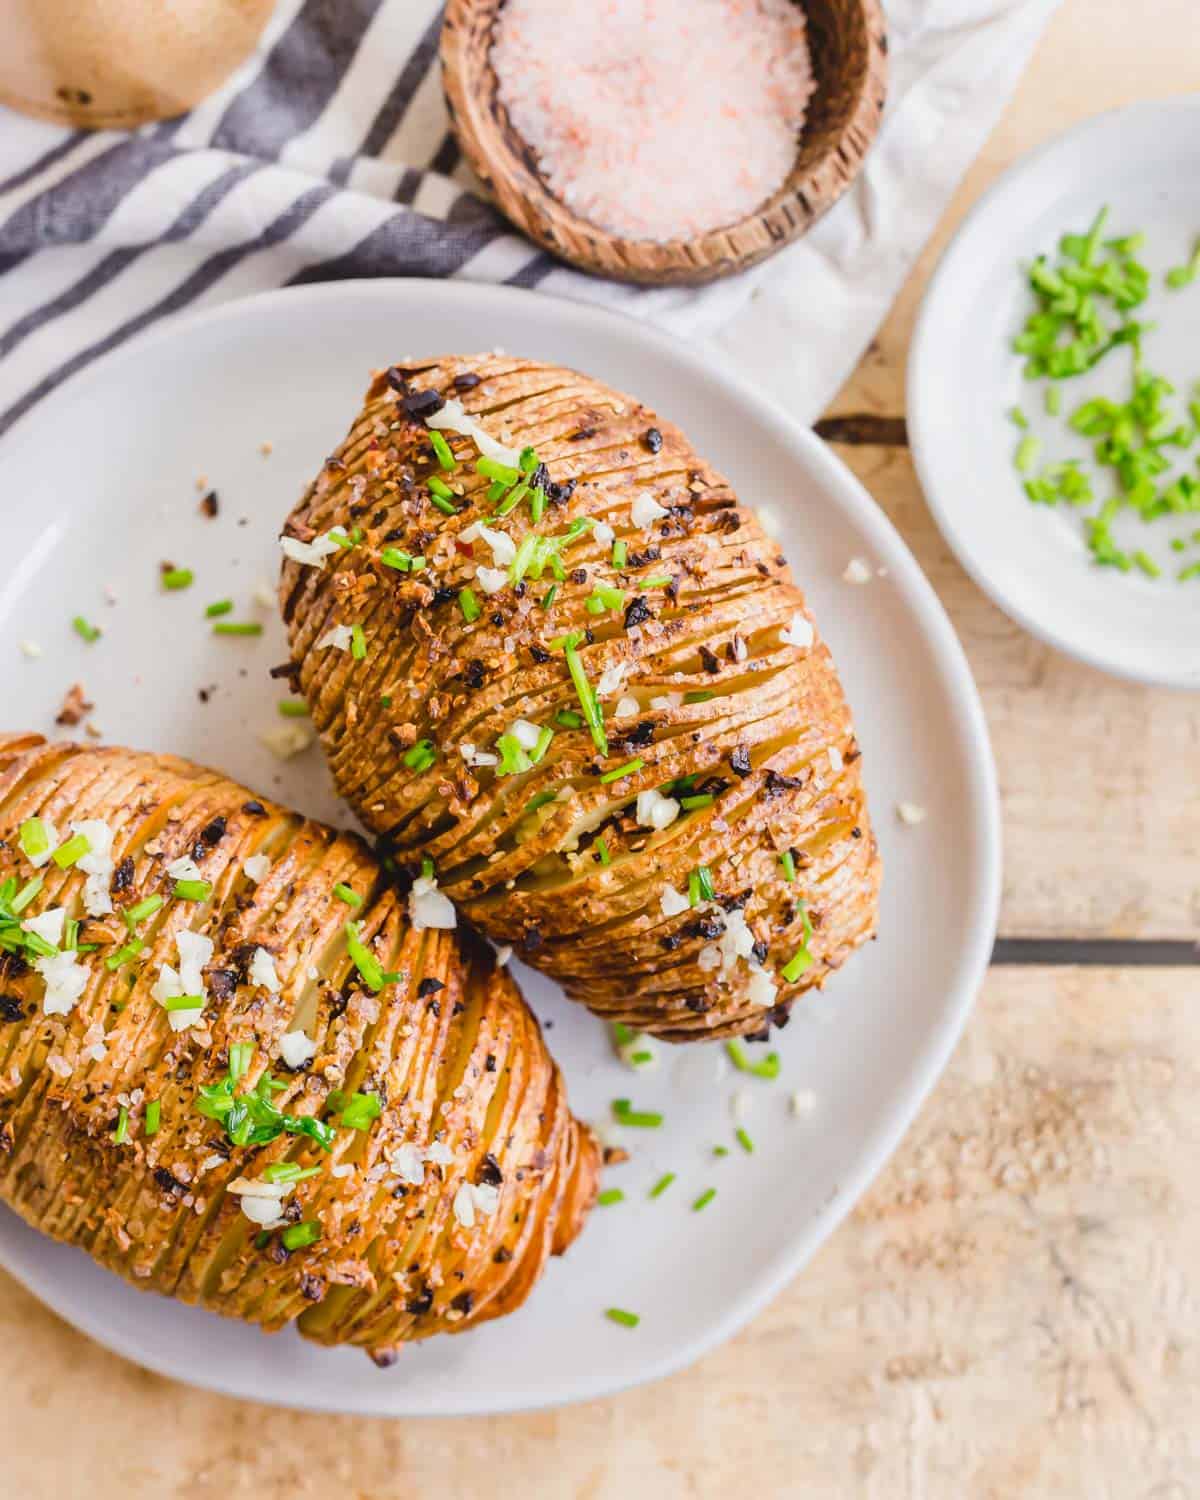 Air fried hasselback potatoes on a plate with garlic and fresh chives.